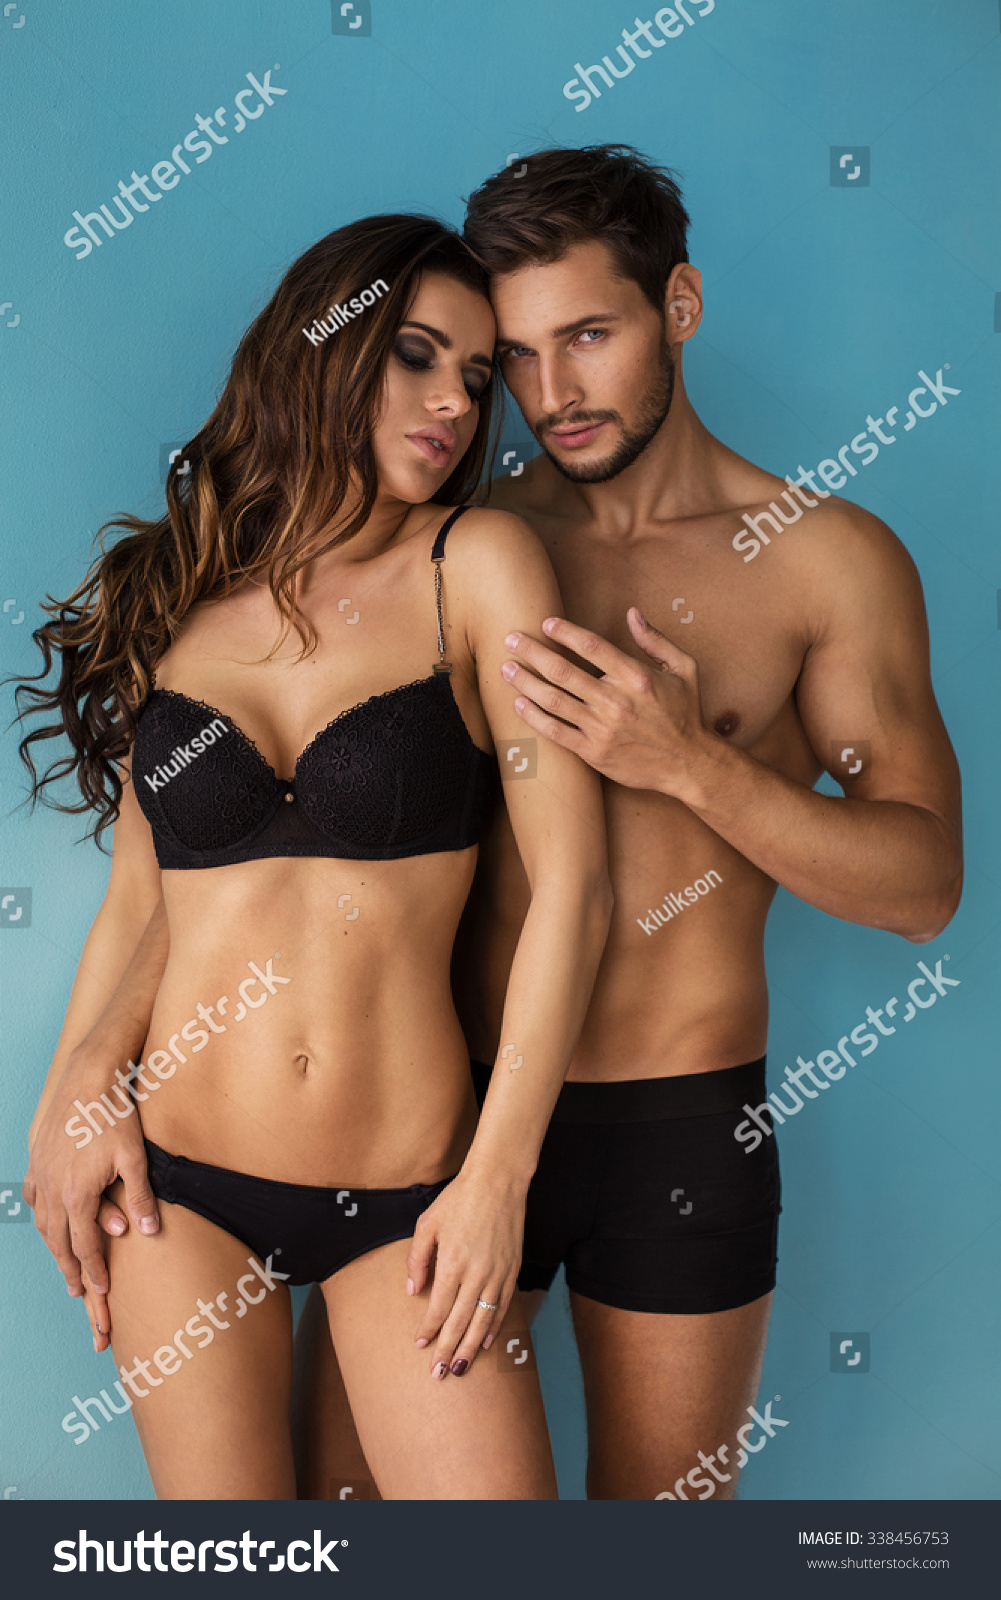 Fashion couple touching each other. Emotional portrait of unusual couple #338456753